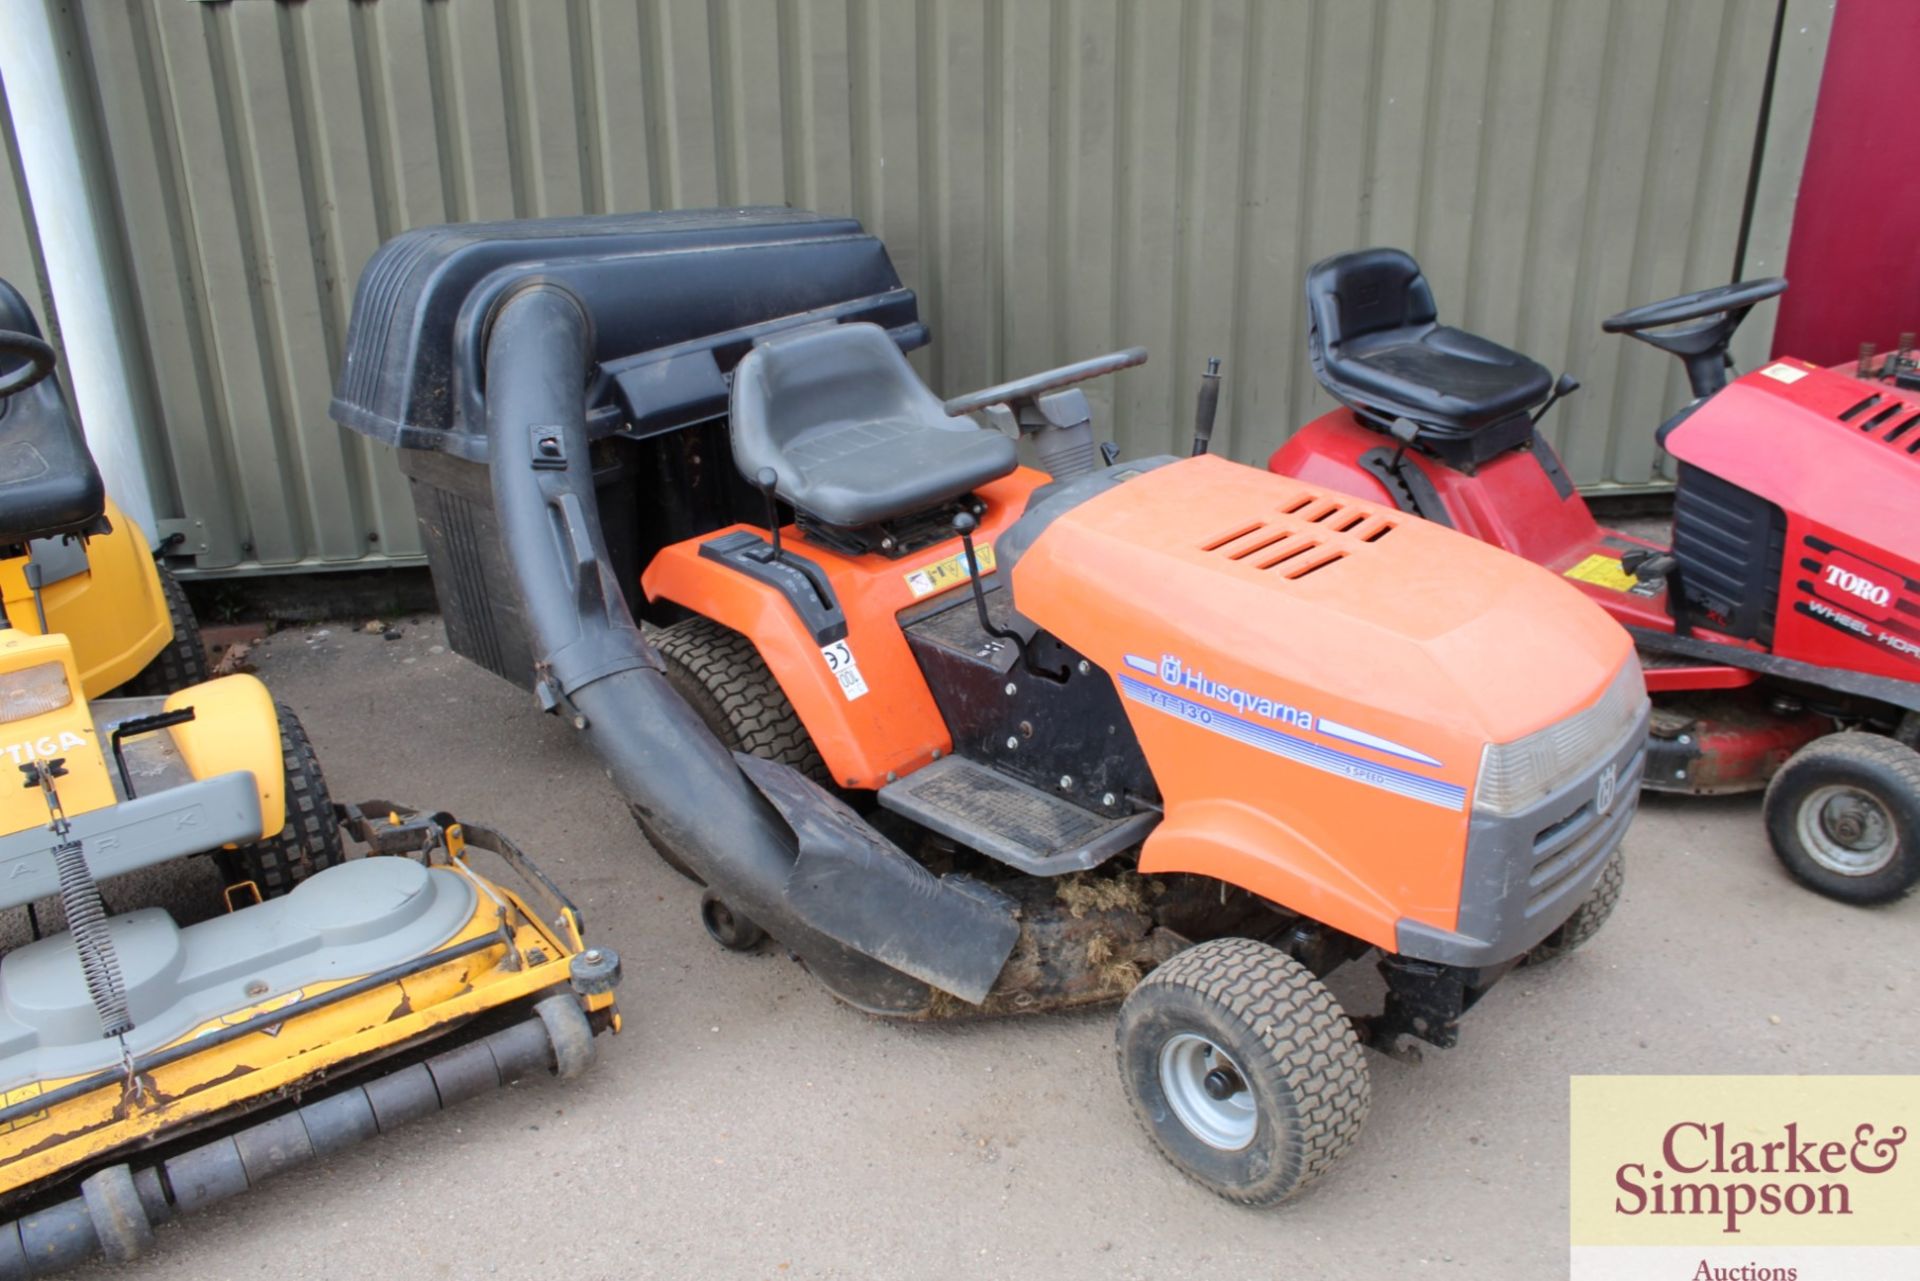 Husqvarna YT130 ride-on mower. With 42in deck, 6-speed gearbox and collector.